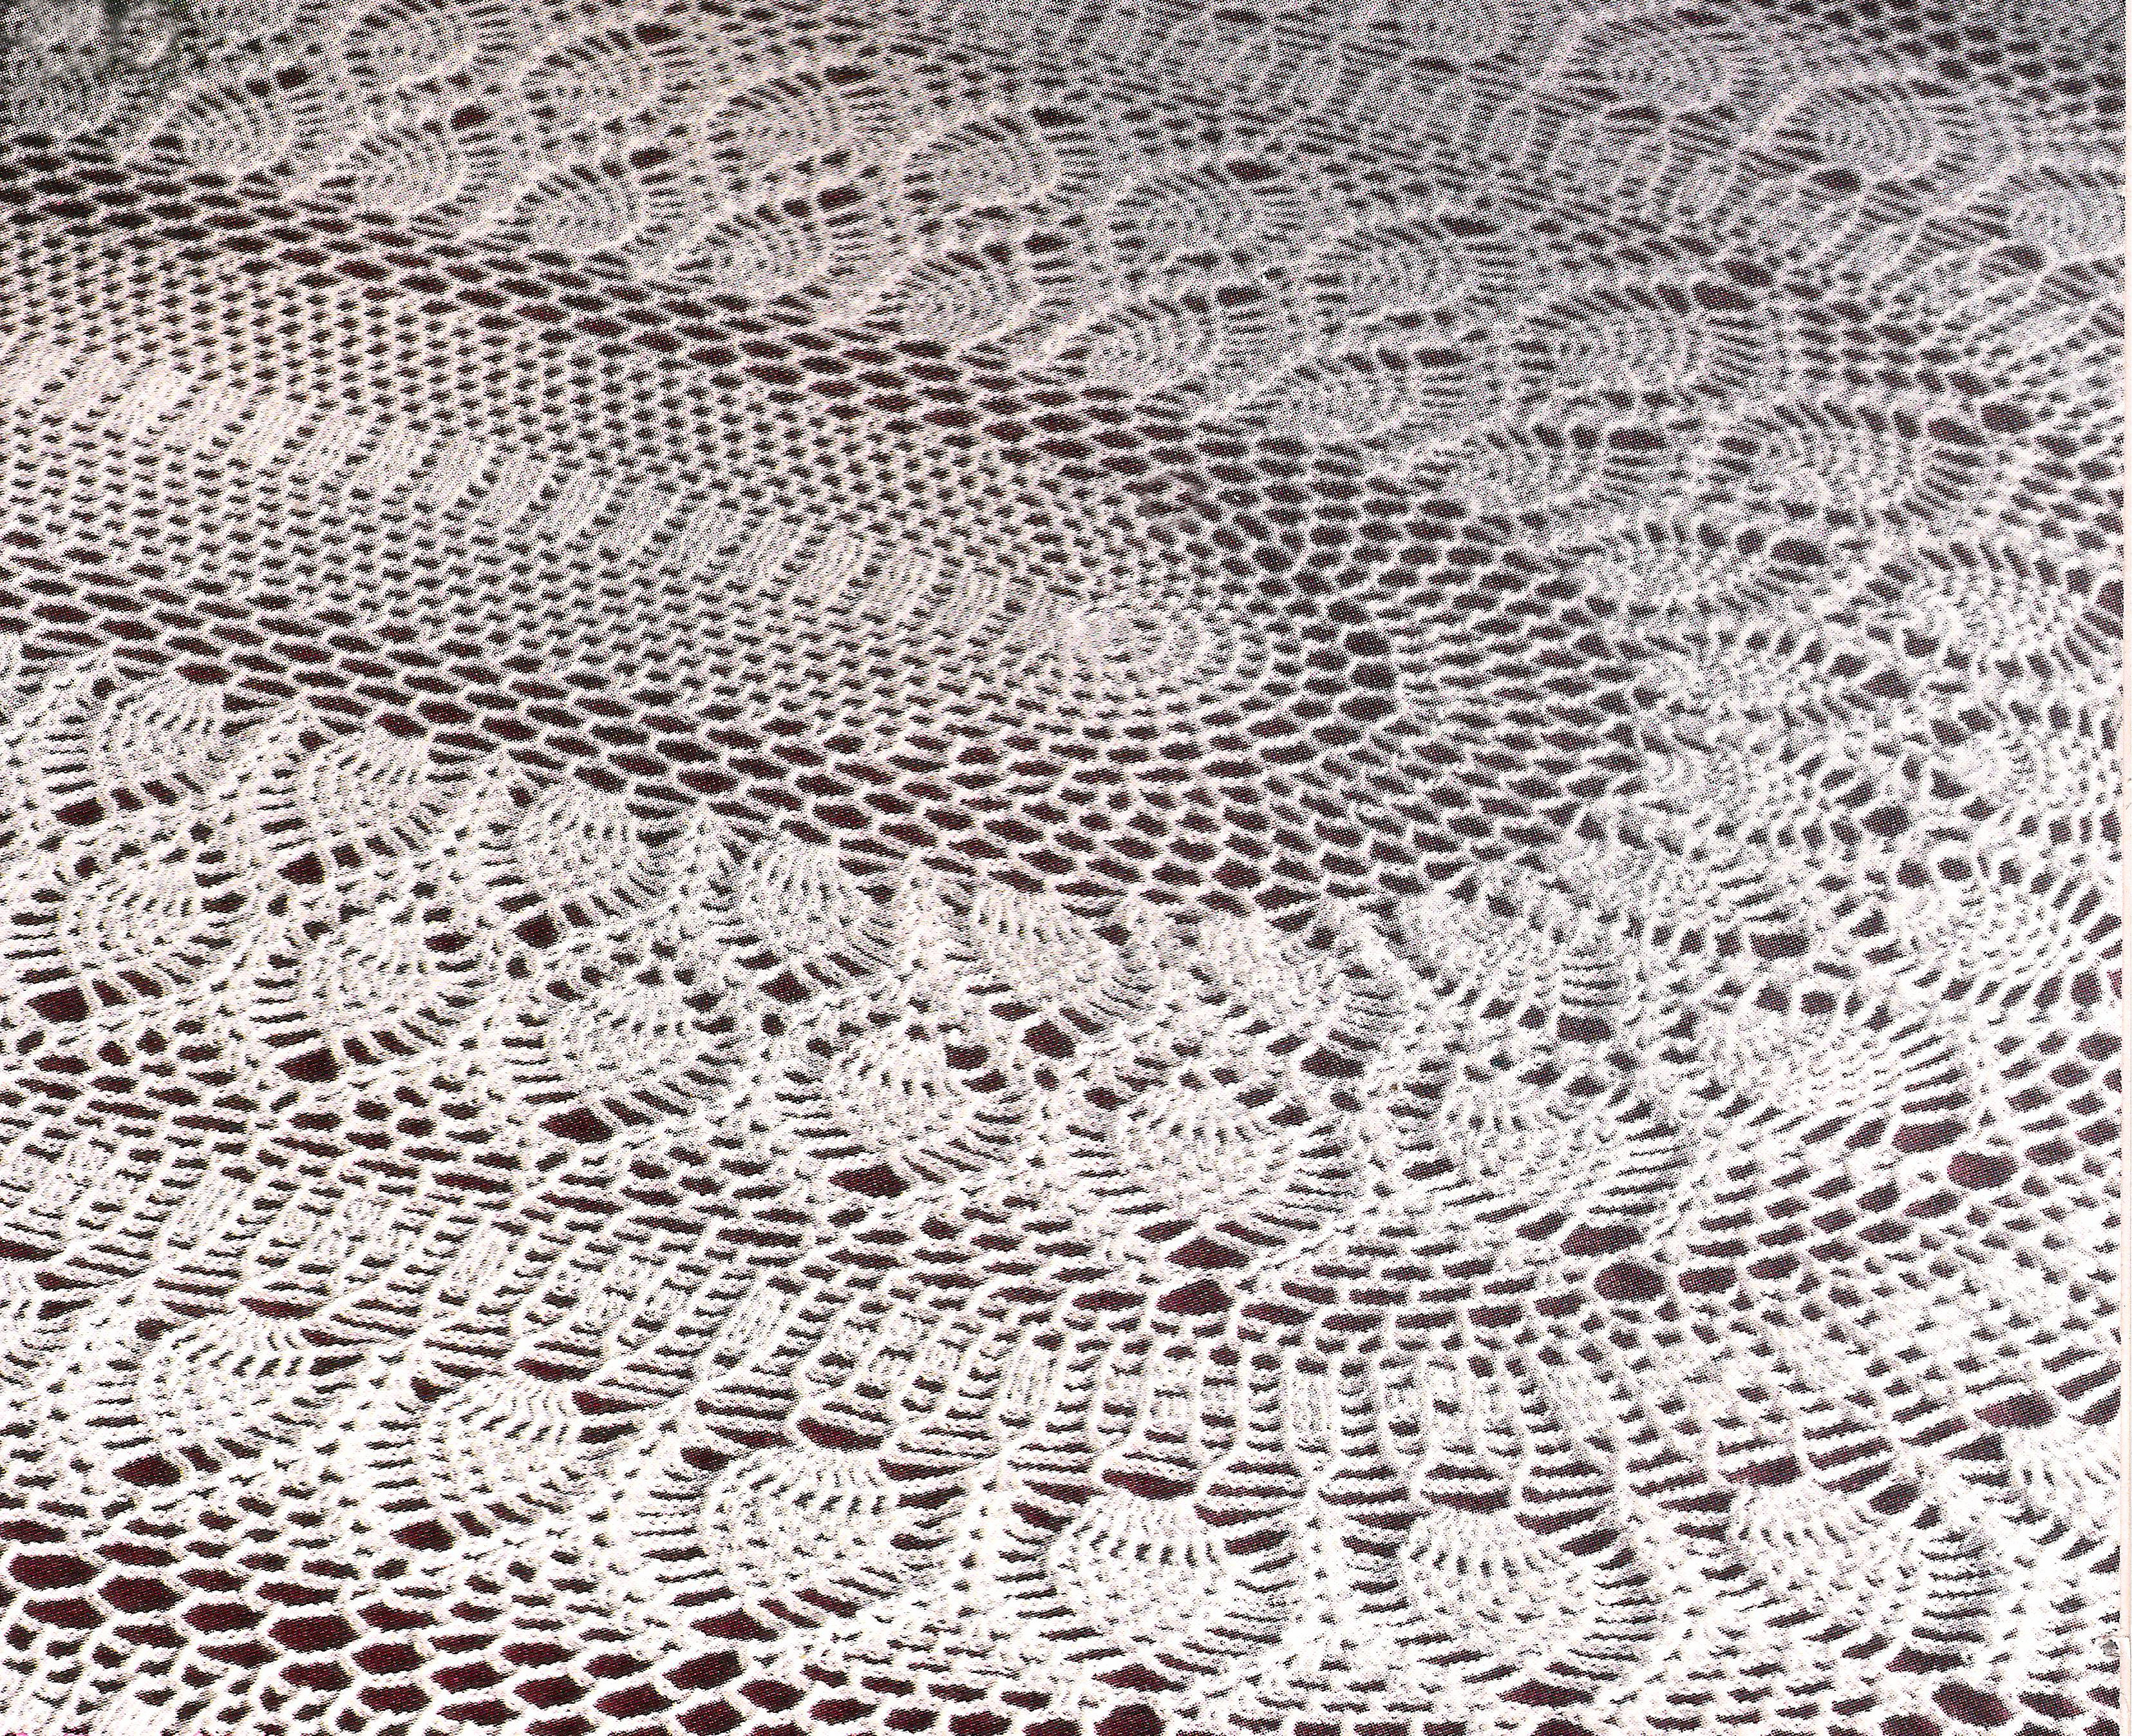 Oval Pineapple Tablecloth Pattern